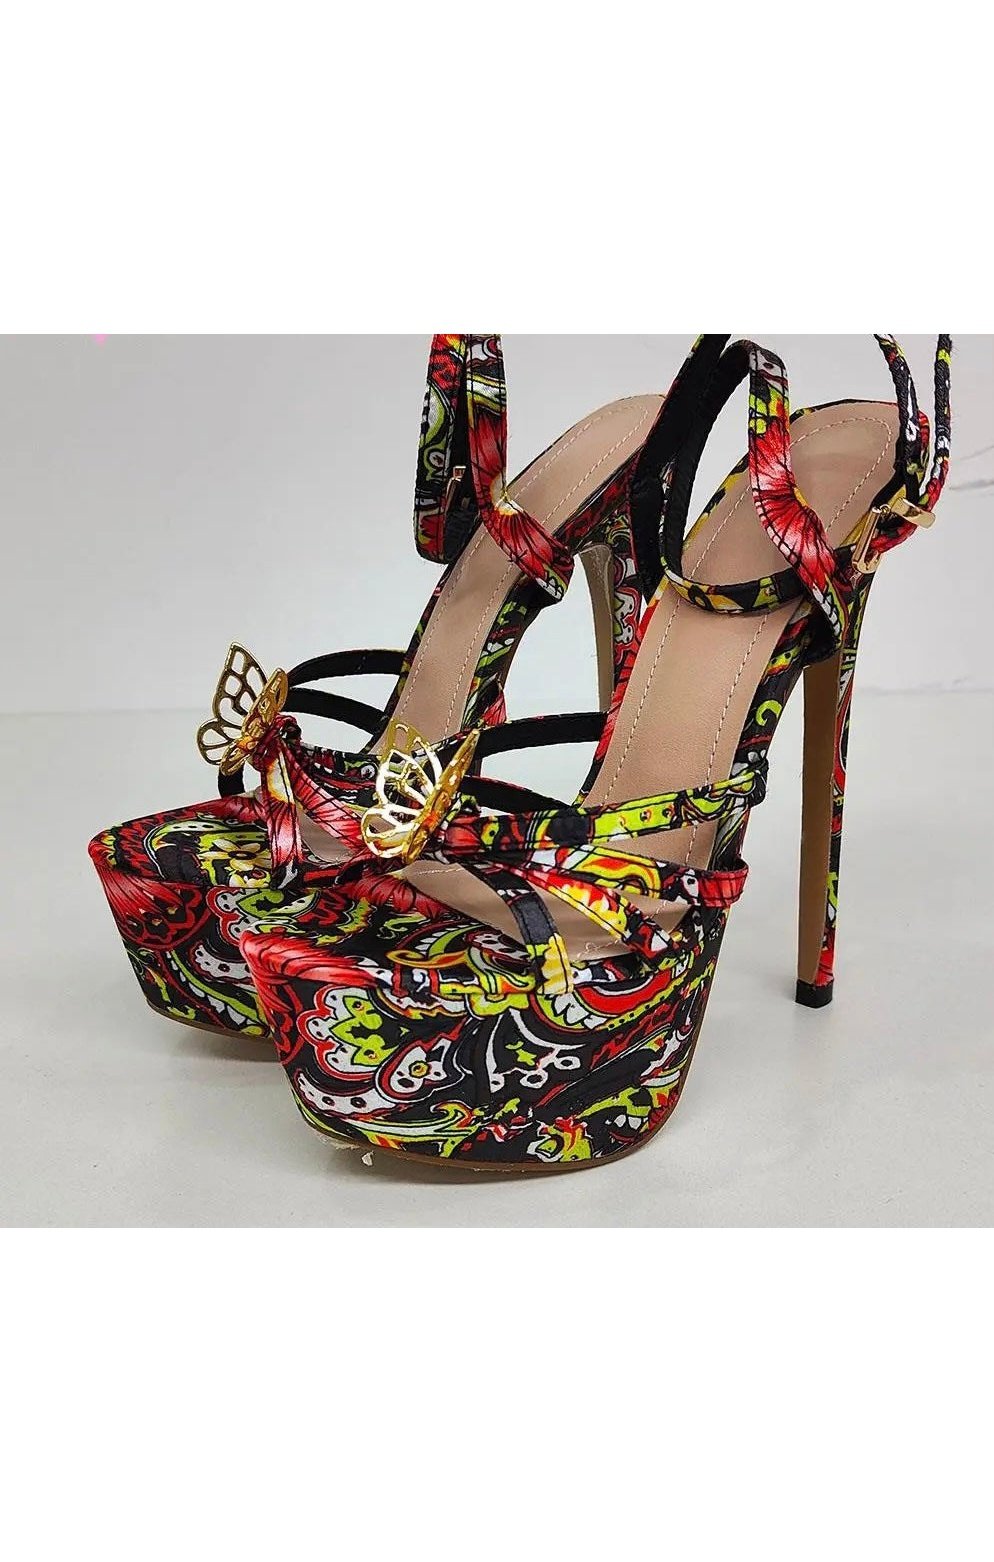 Floral Sexy Luxury High Heel Shoes Woman sandals